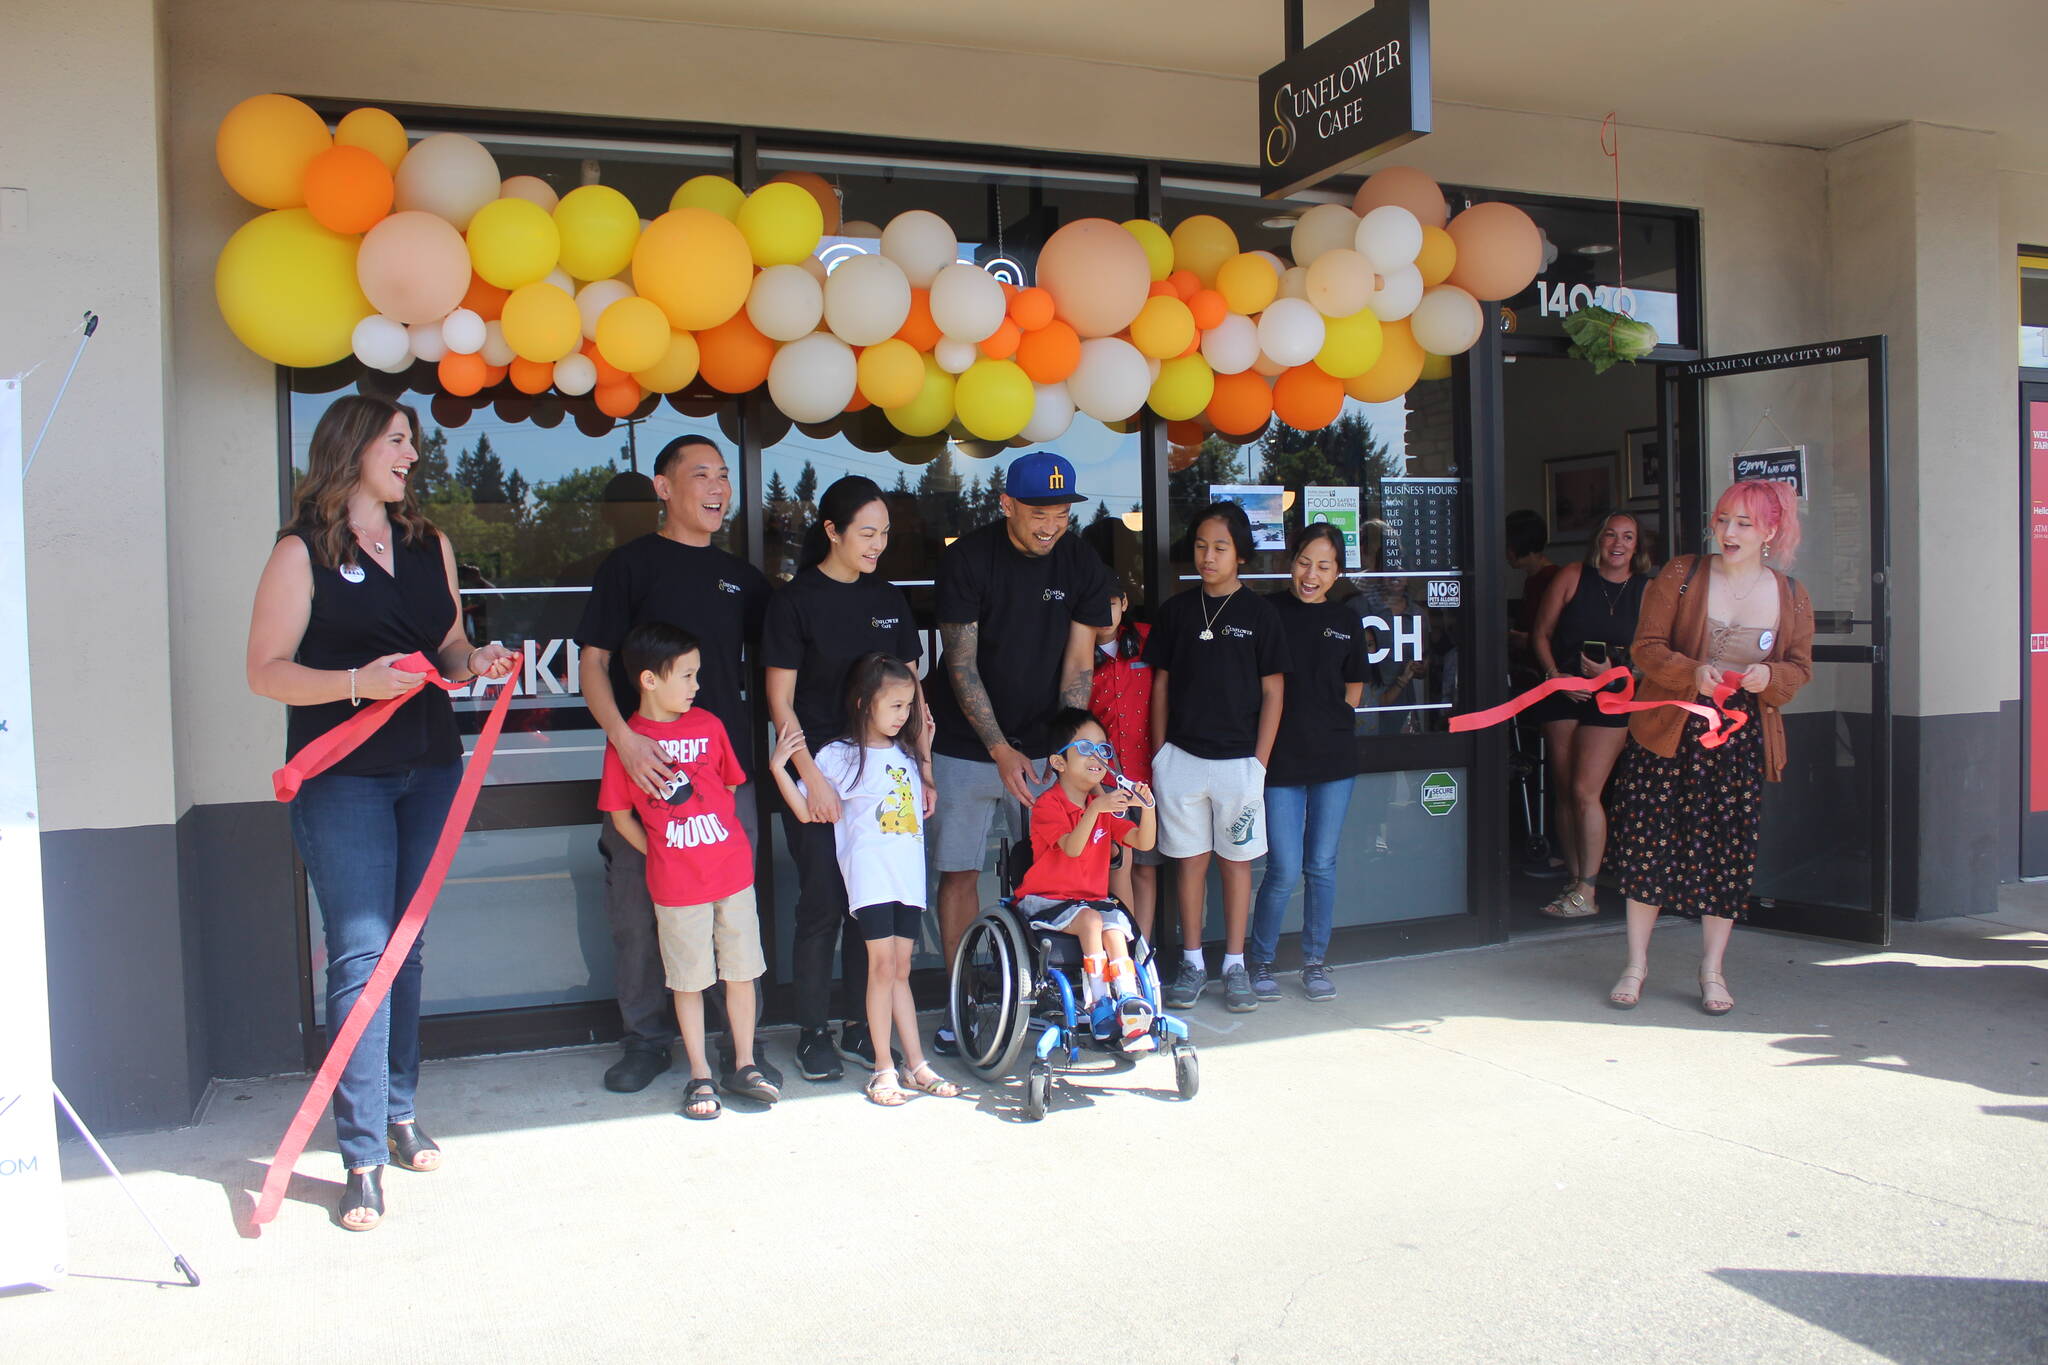 On Thursday, Aug. 17, the long-awaited Sunflower Café had its official ribbon-cutting in Fairwood, complete with lion dancers who performed outside and inside the restaurant as customers ate their food. A crowd gathered to celebrate the new family-owned restaurant at 14020 Southeast Petrovitsky Road. The café serves daily breakfast, from 8 a.m. to 3 p.m. (Photos by Bailey Jo Josie/Sound Publishing)